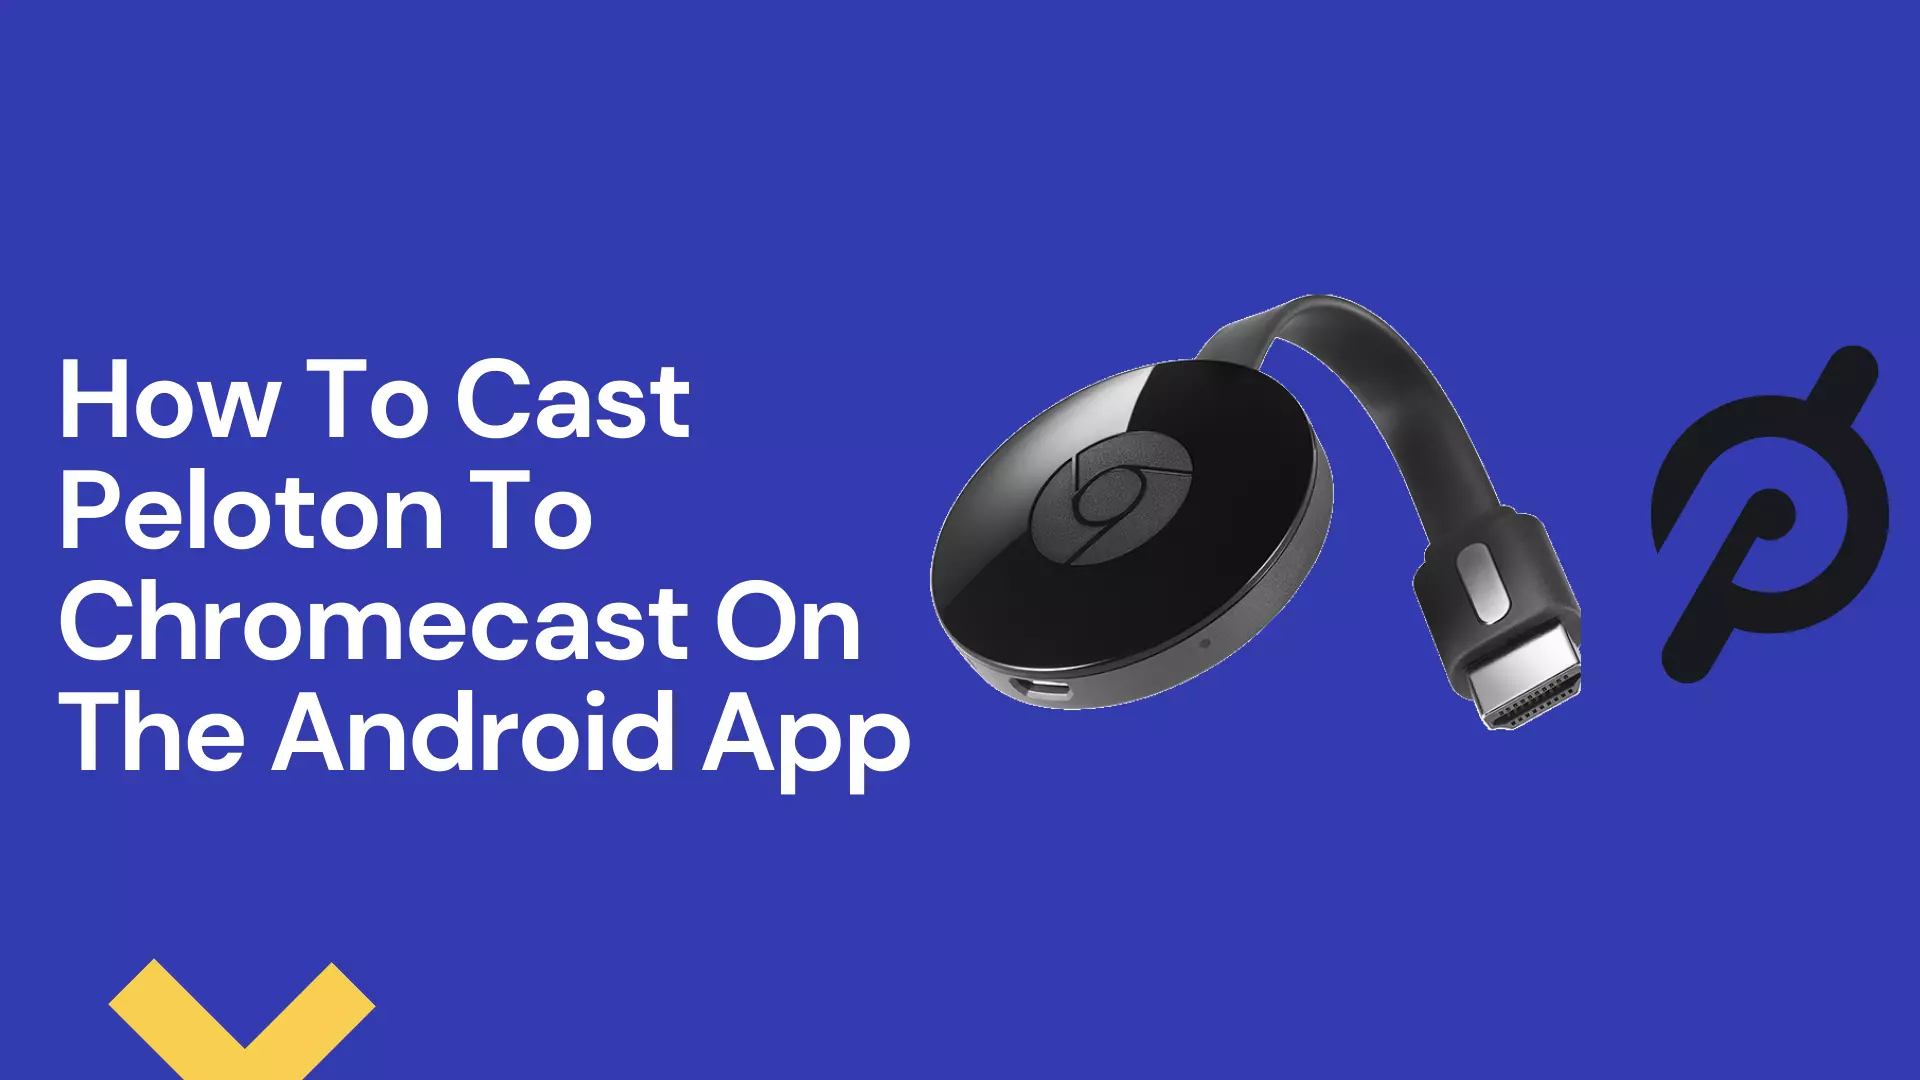 How To Cast Peloton To Chromecast On The Android App